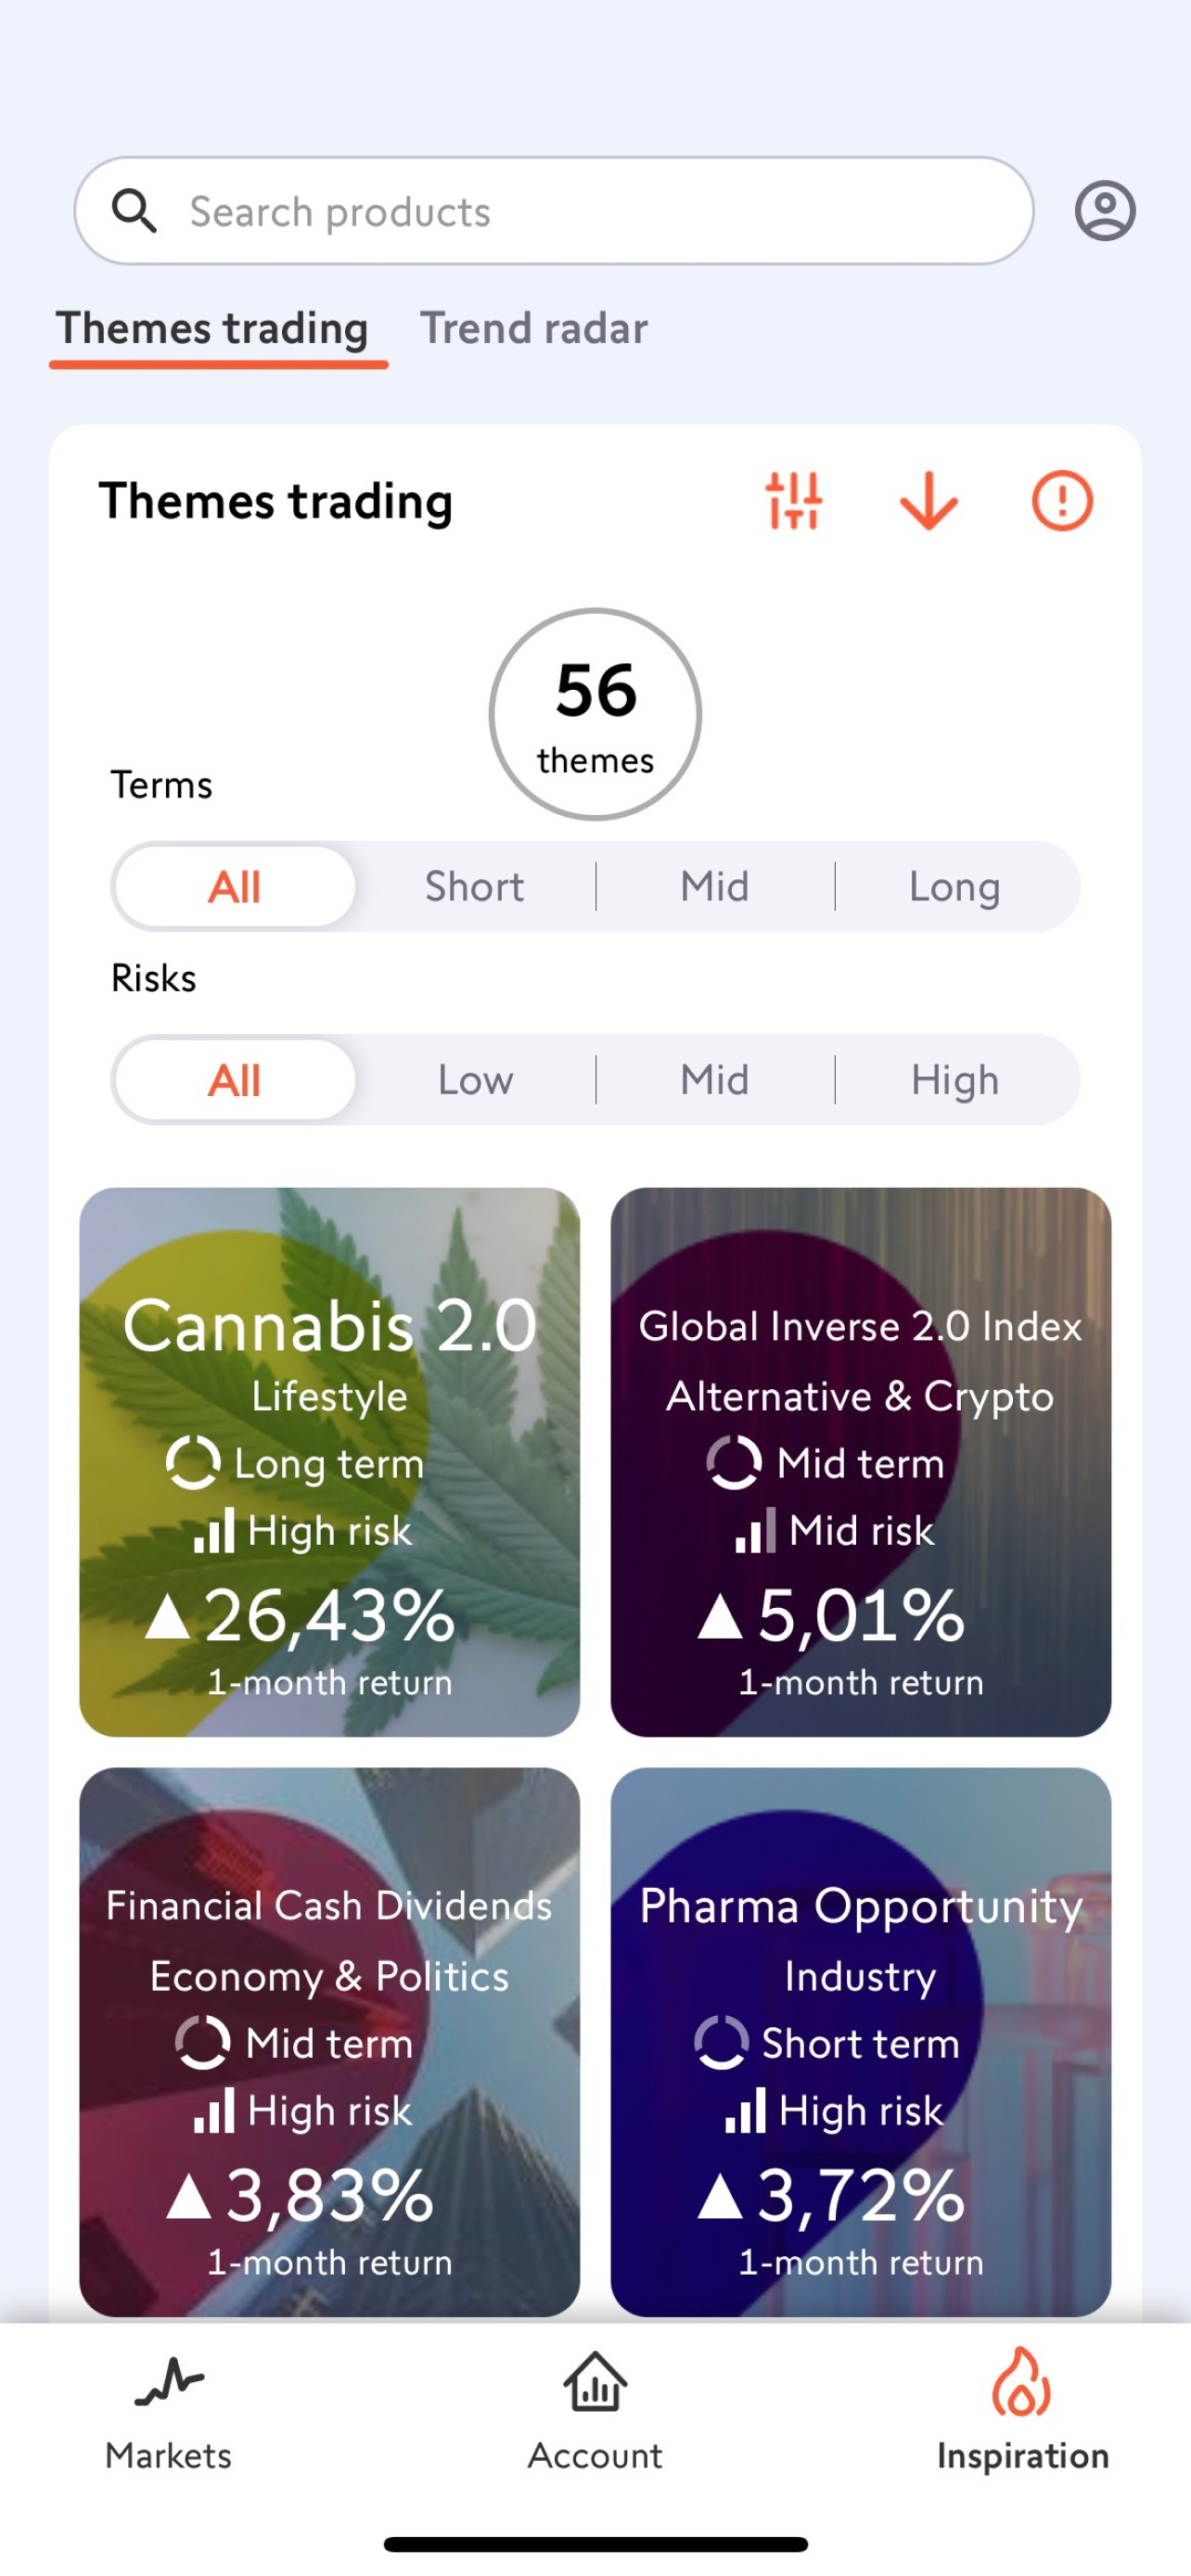 Themes trading platform presented on a smartphone